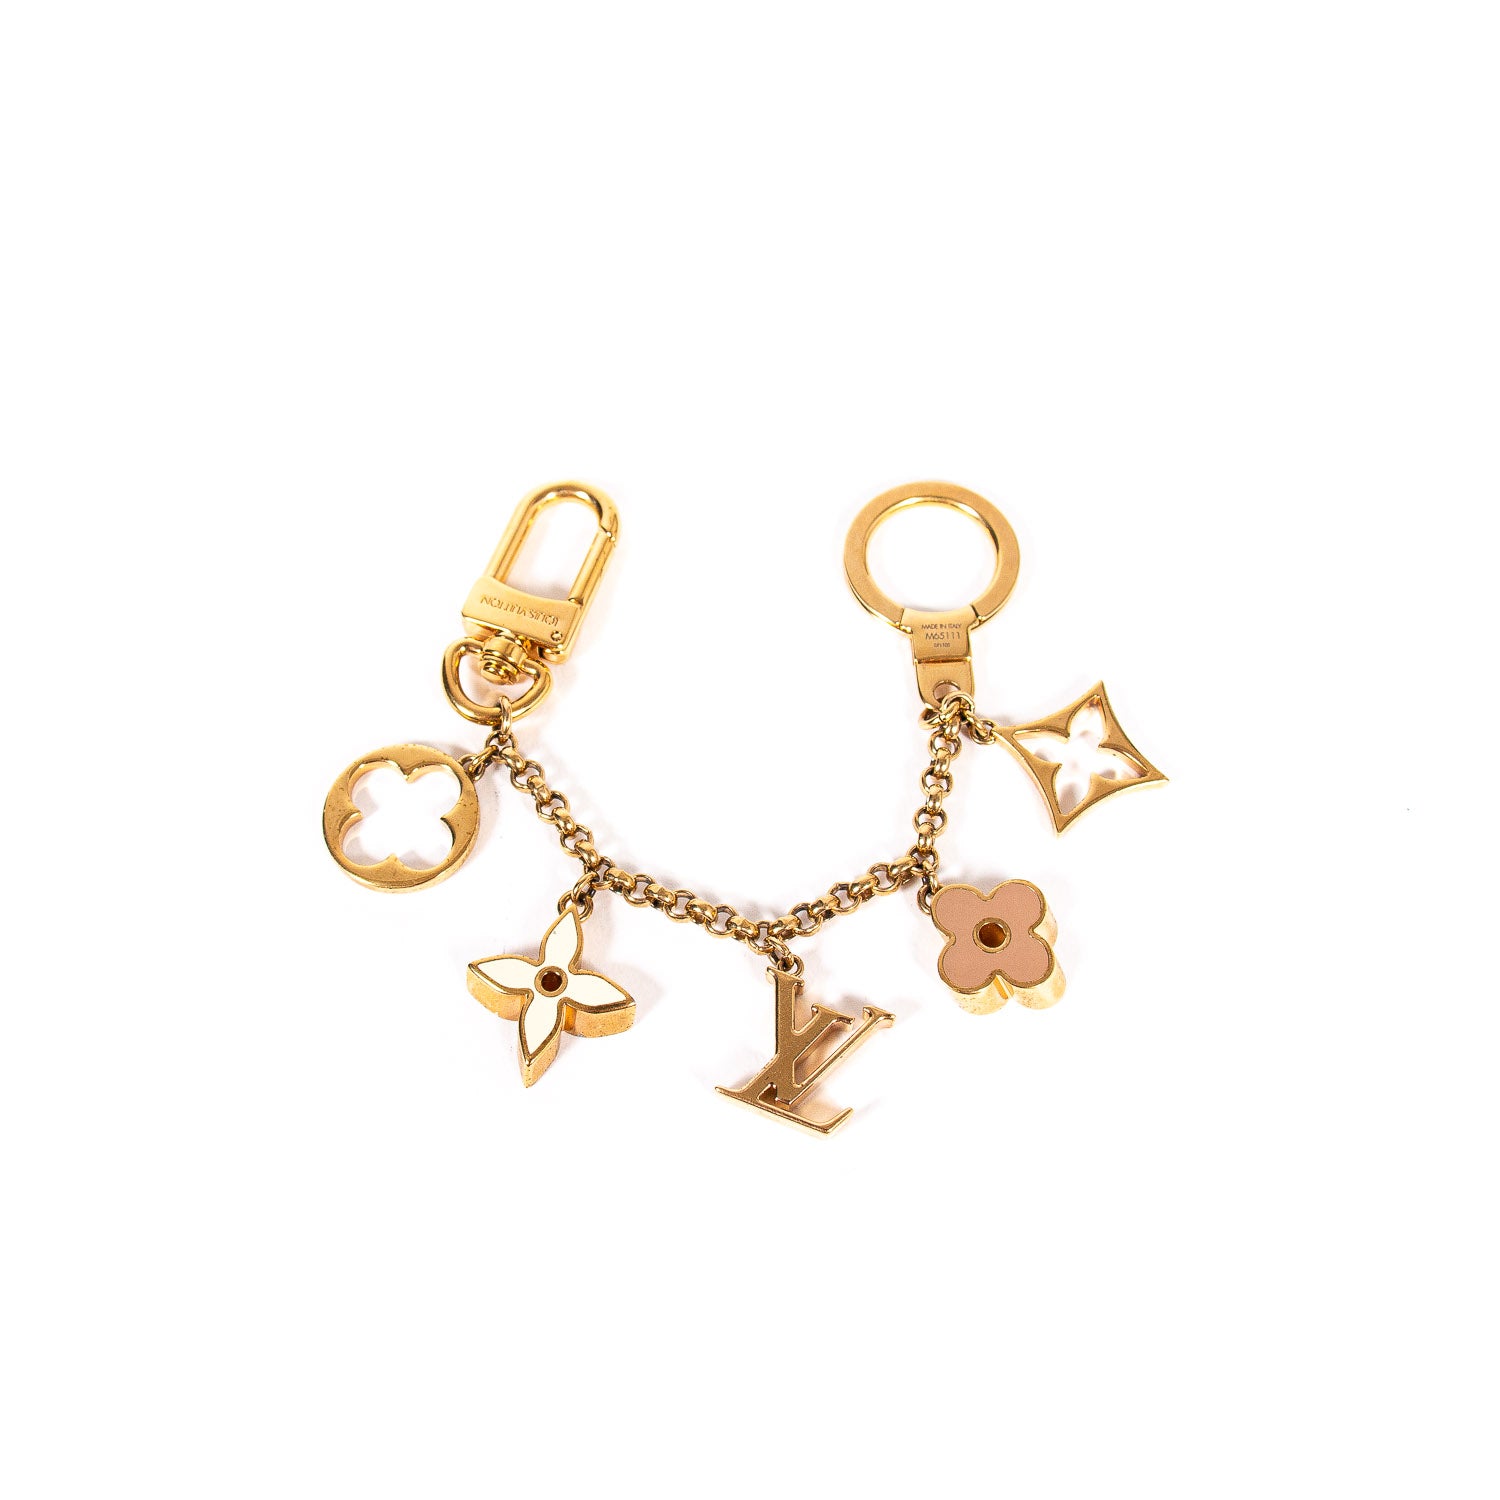 Lv Spring Chain Bag Charm  Natural Resource Department